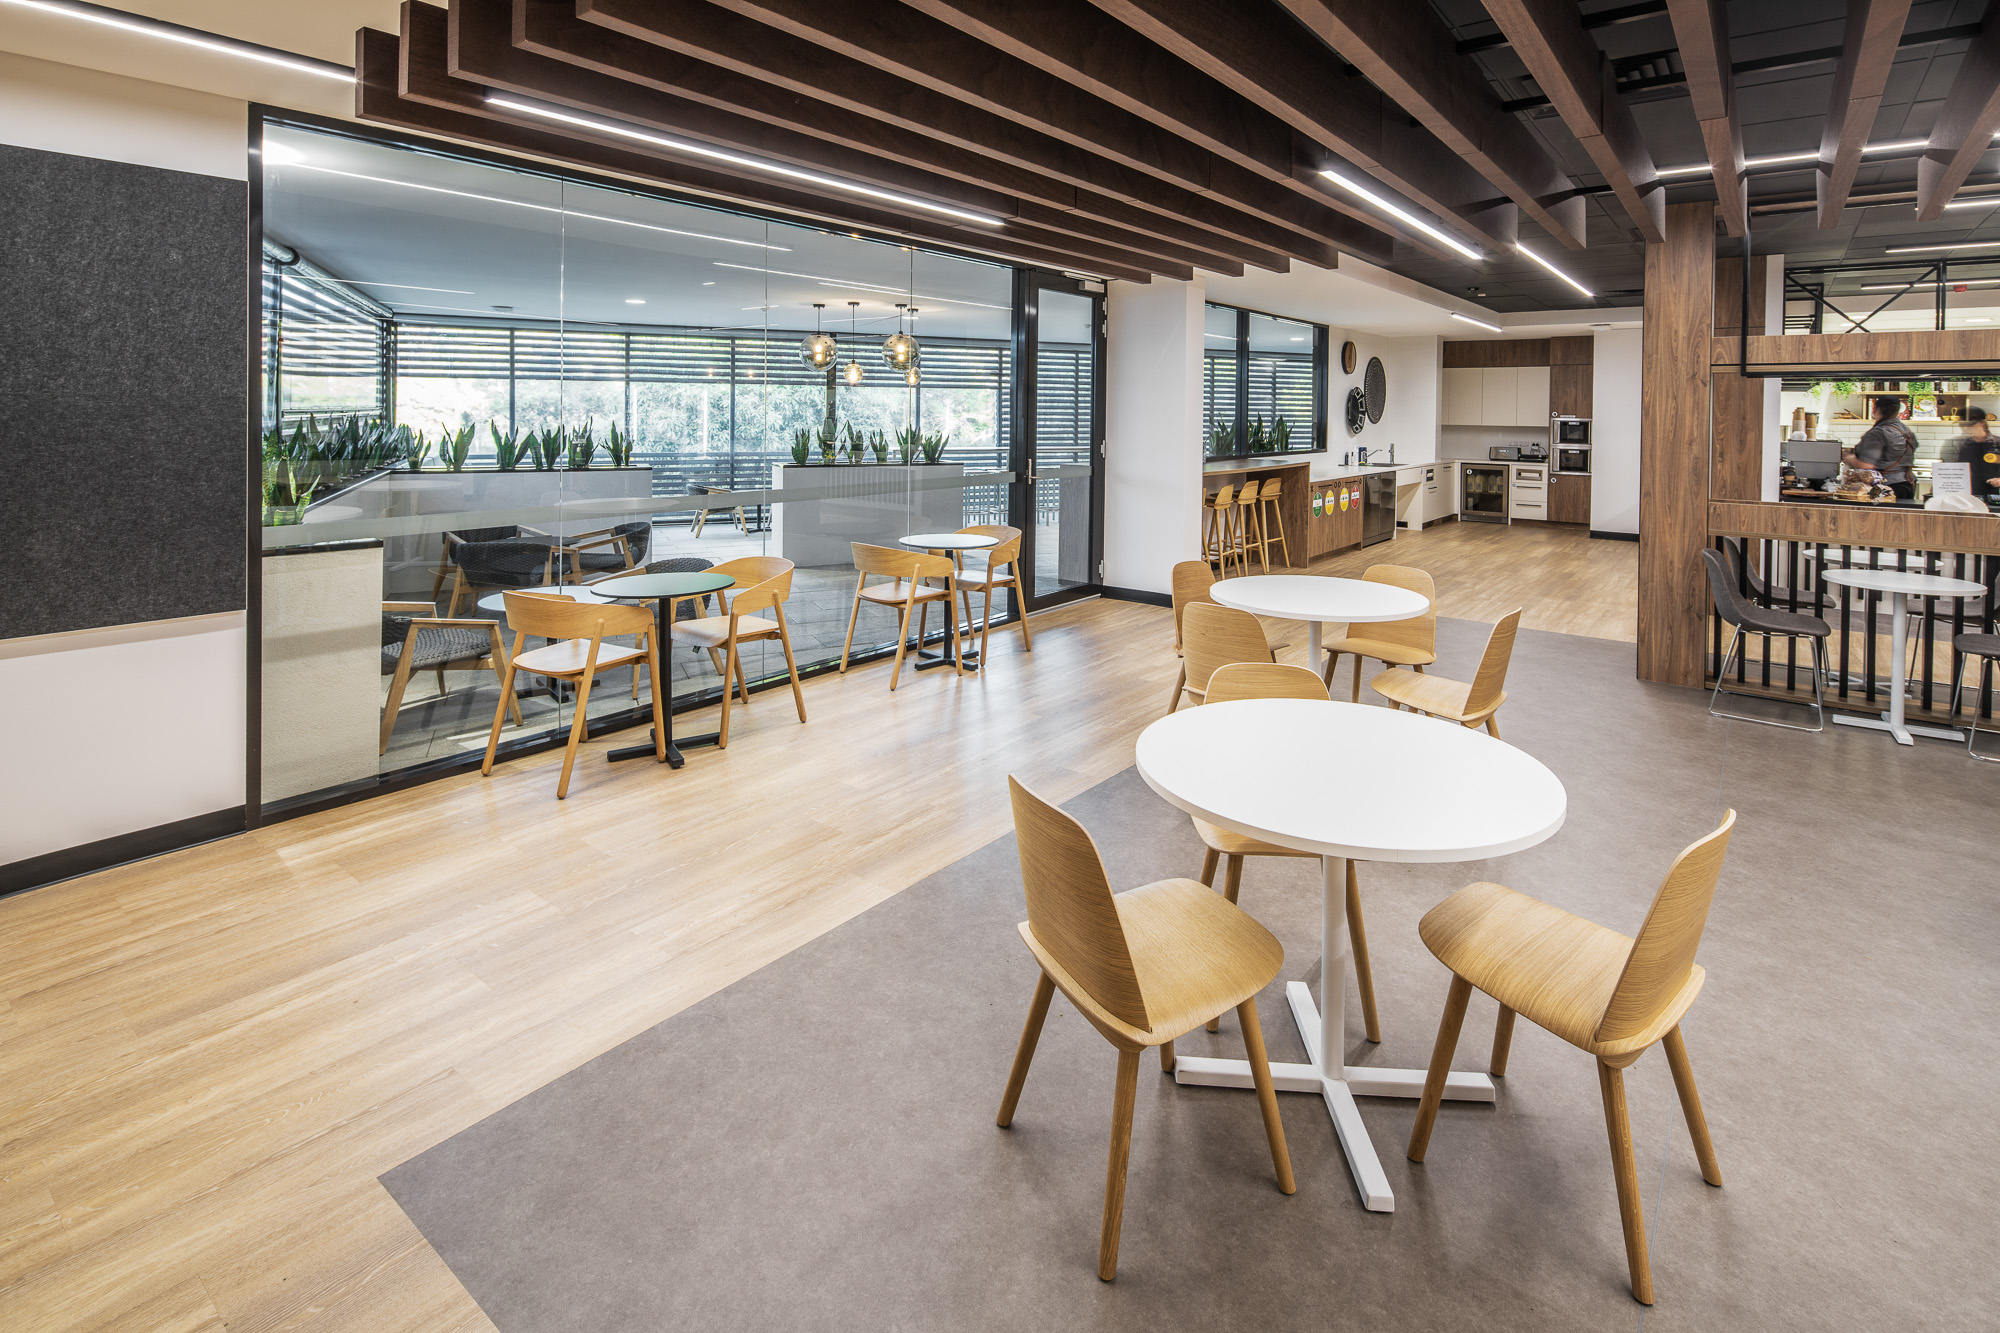 Corporate cafe seating area designed by Hodgkison Architects Adelaide